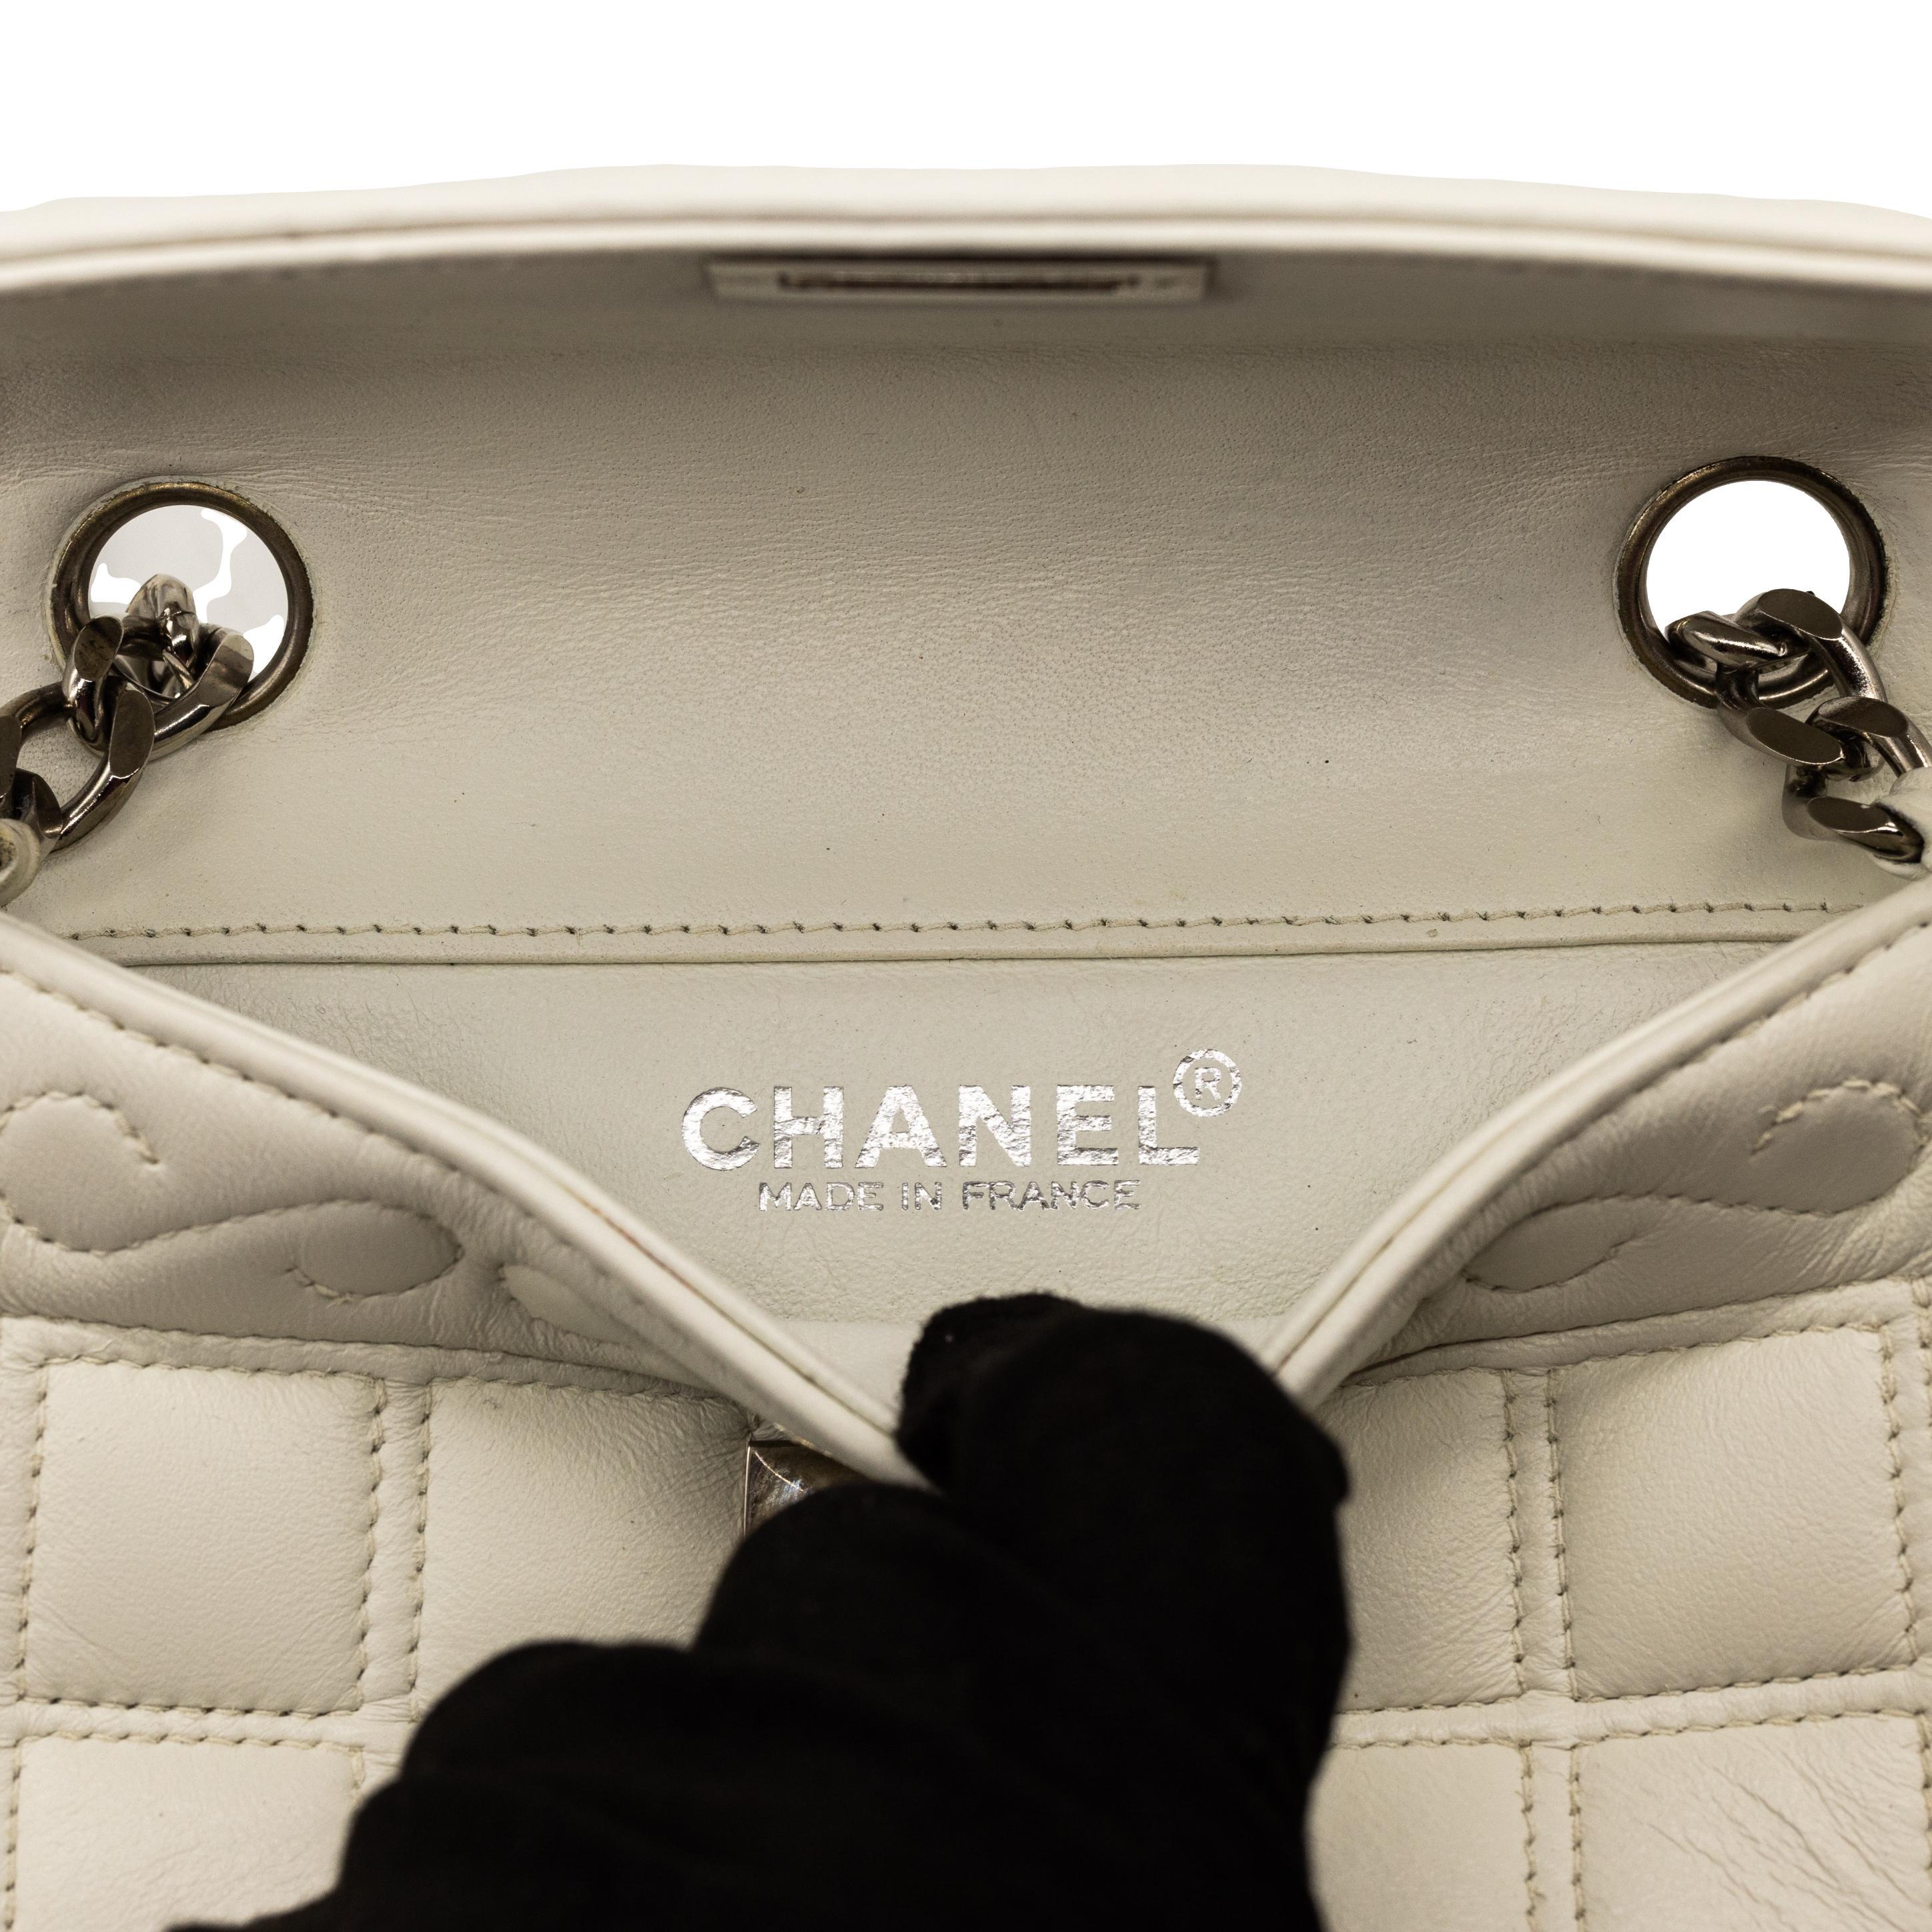 Chanel Limited Edition 2.55 Re-Issue White Mini Chocolate Bar Shoulder Bag, 2002 8